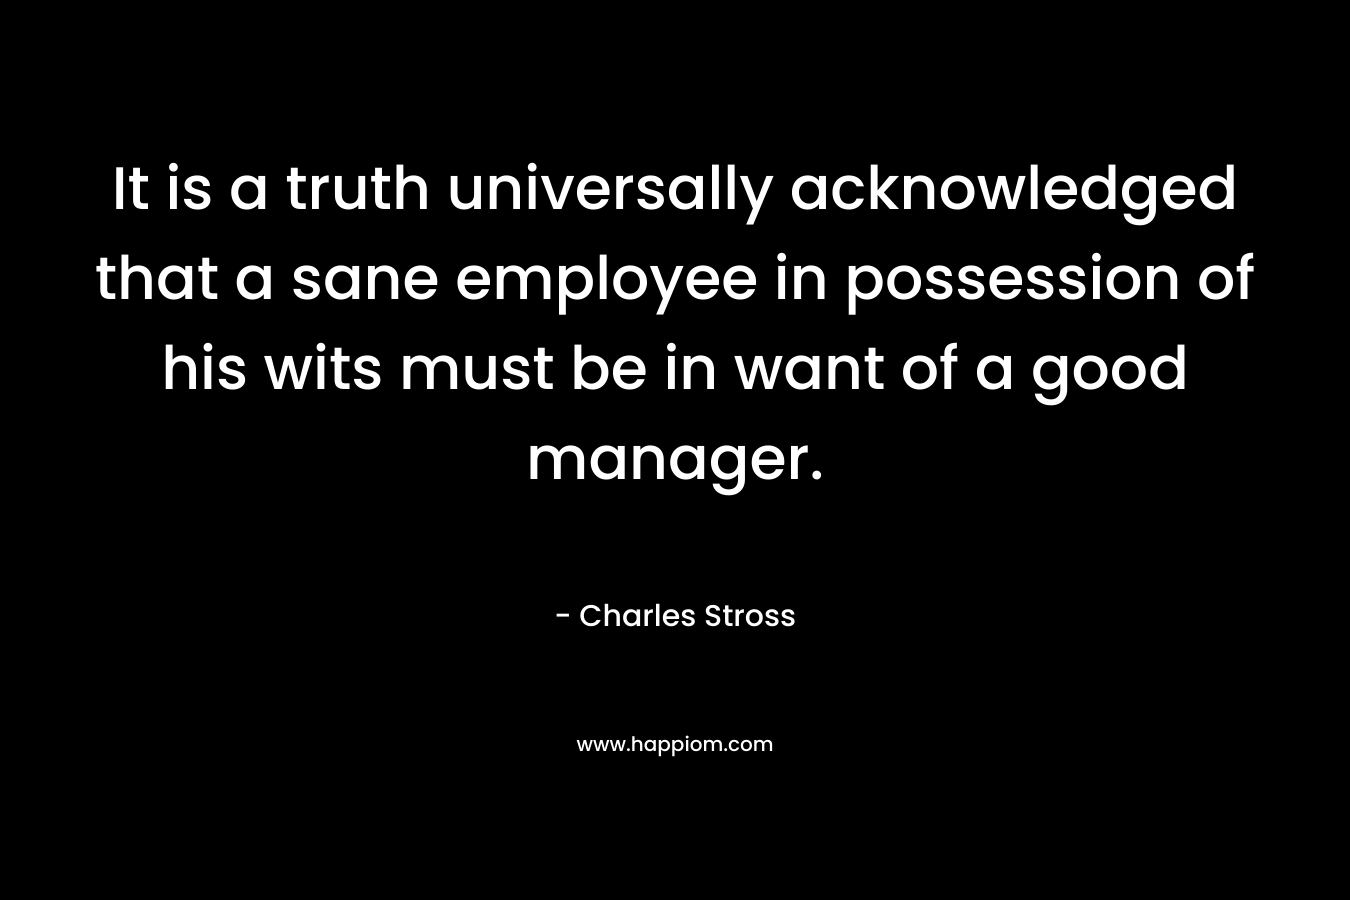 It is a truth universally acknowledged that a sane employee in possession of his wits must be in want of a good manager.